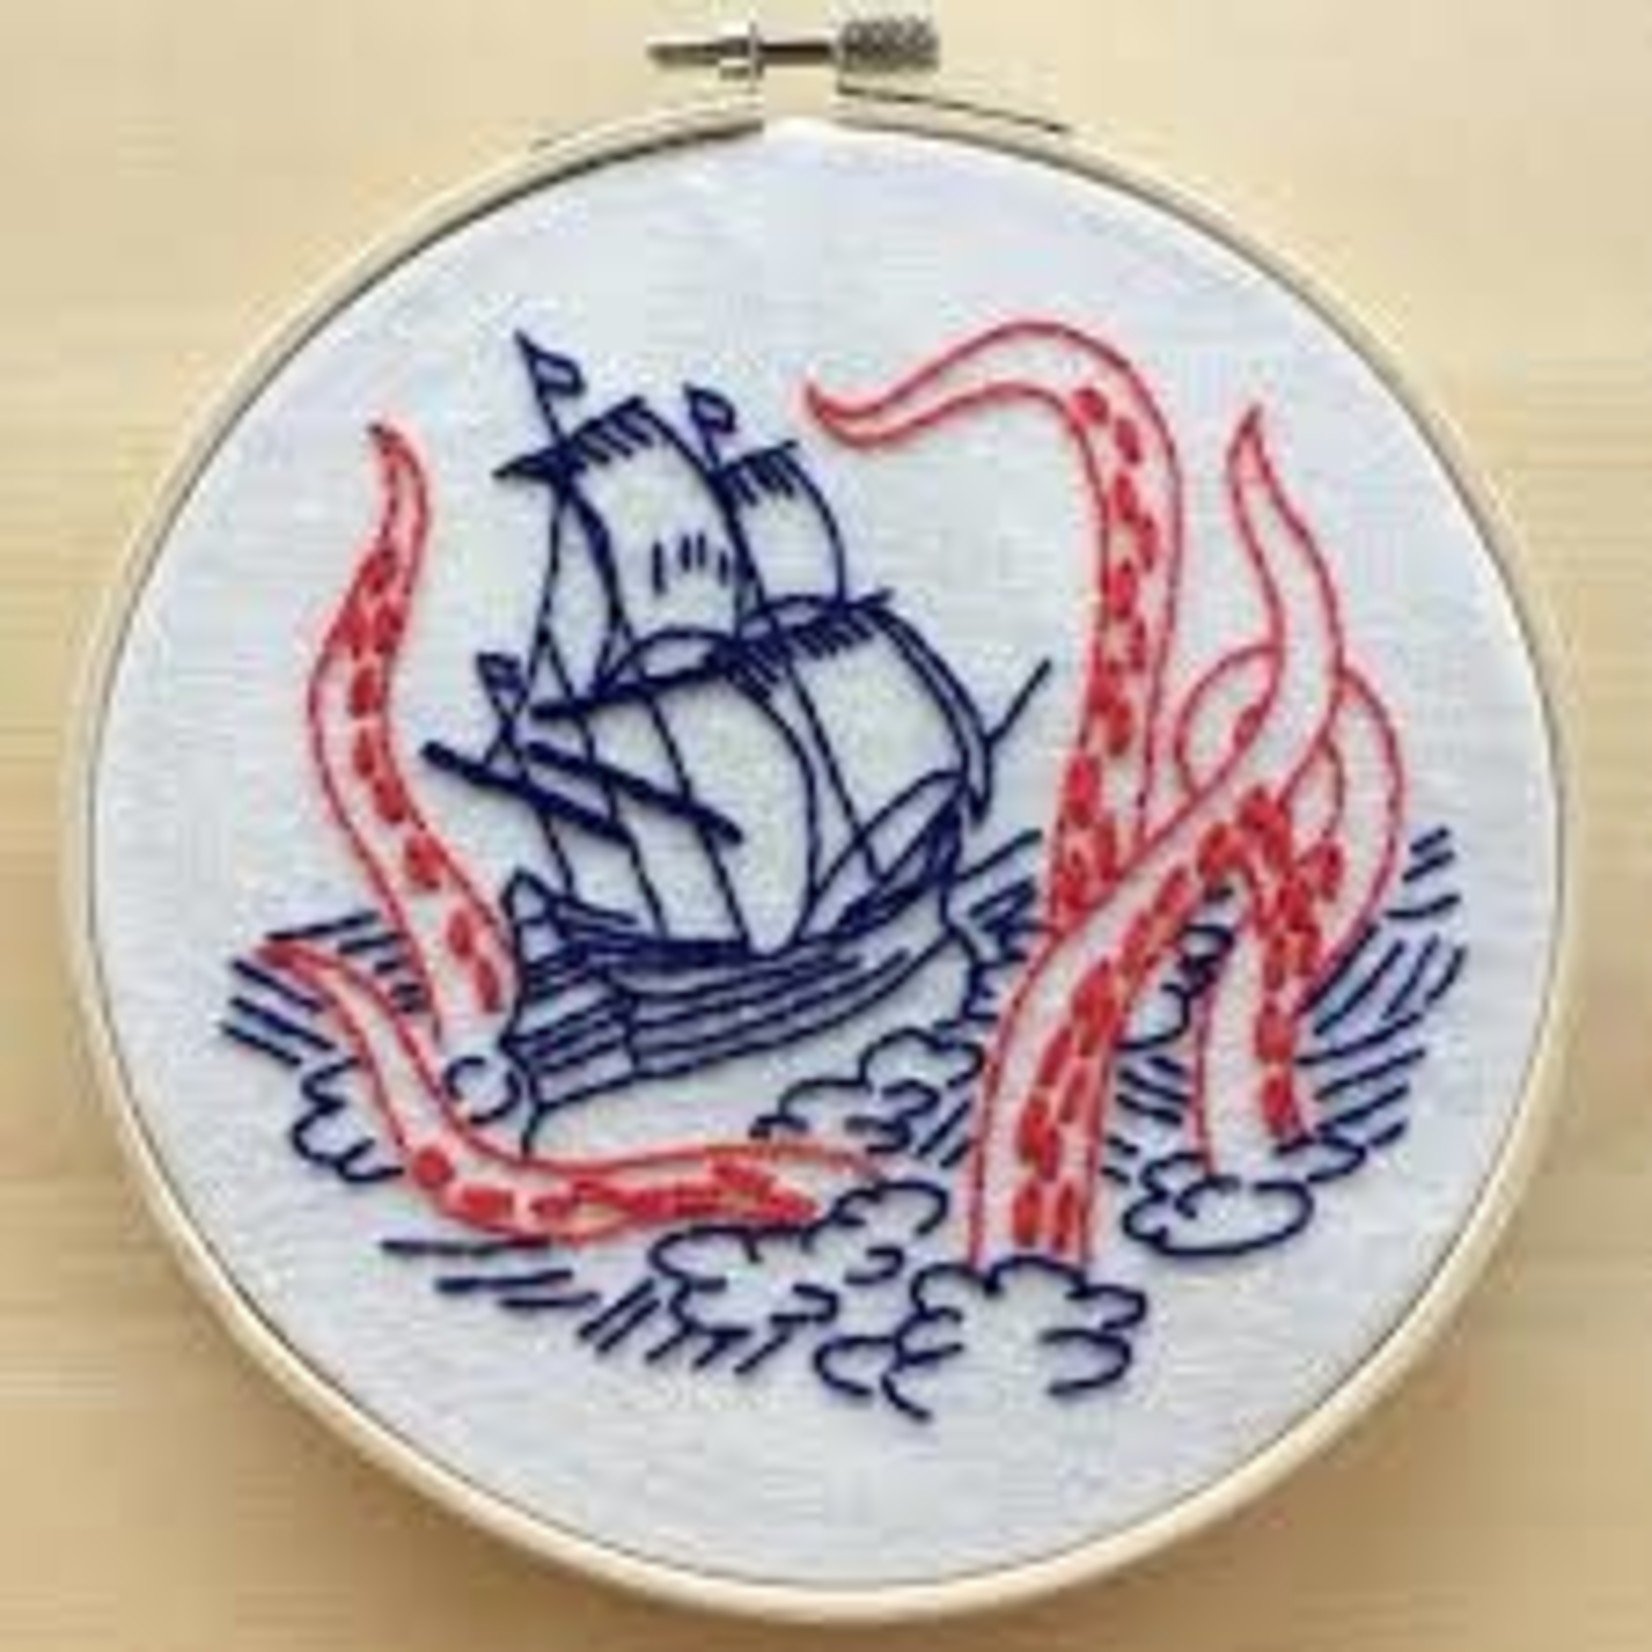 Hook Line and Tinker Release the Kraken Complete Embroidery Kit